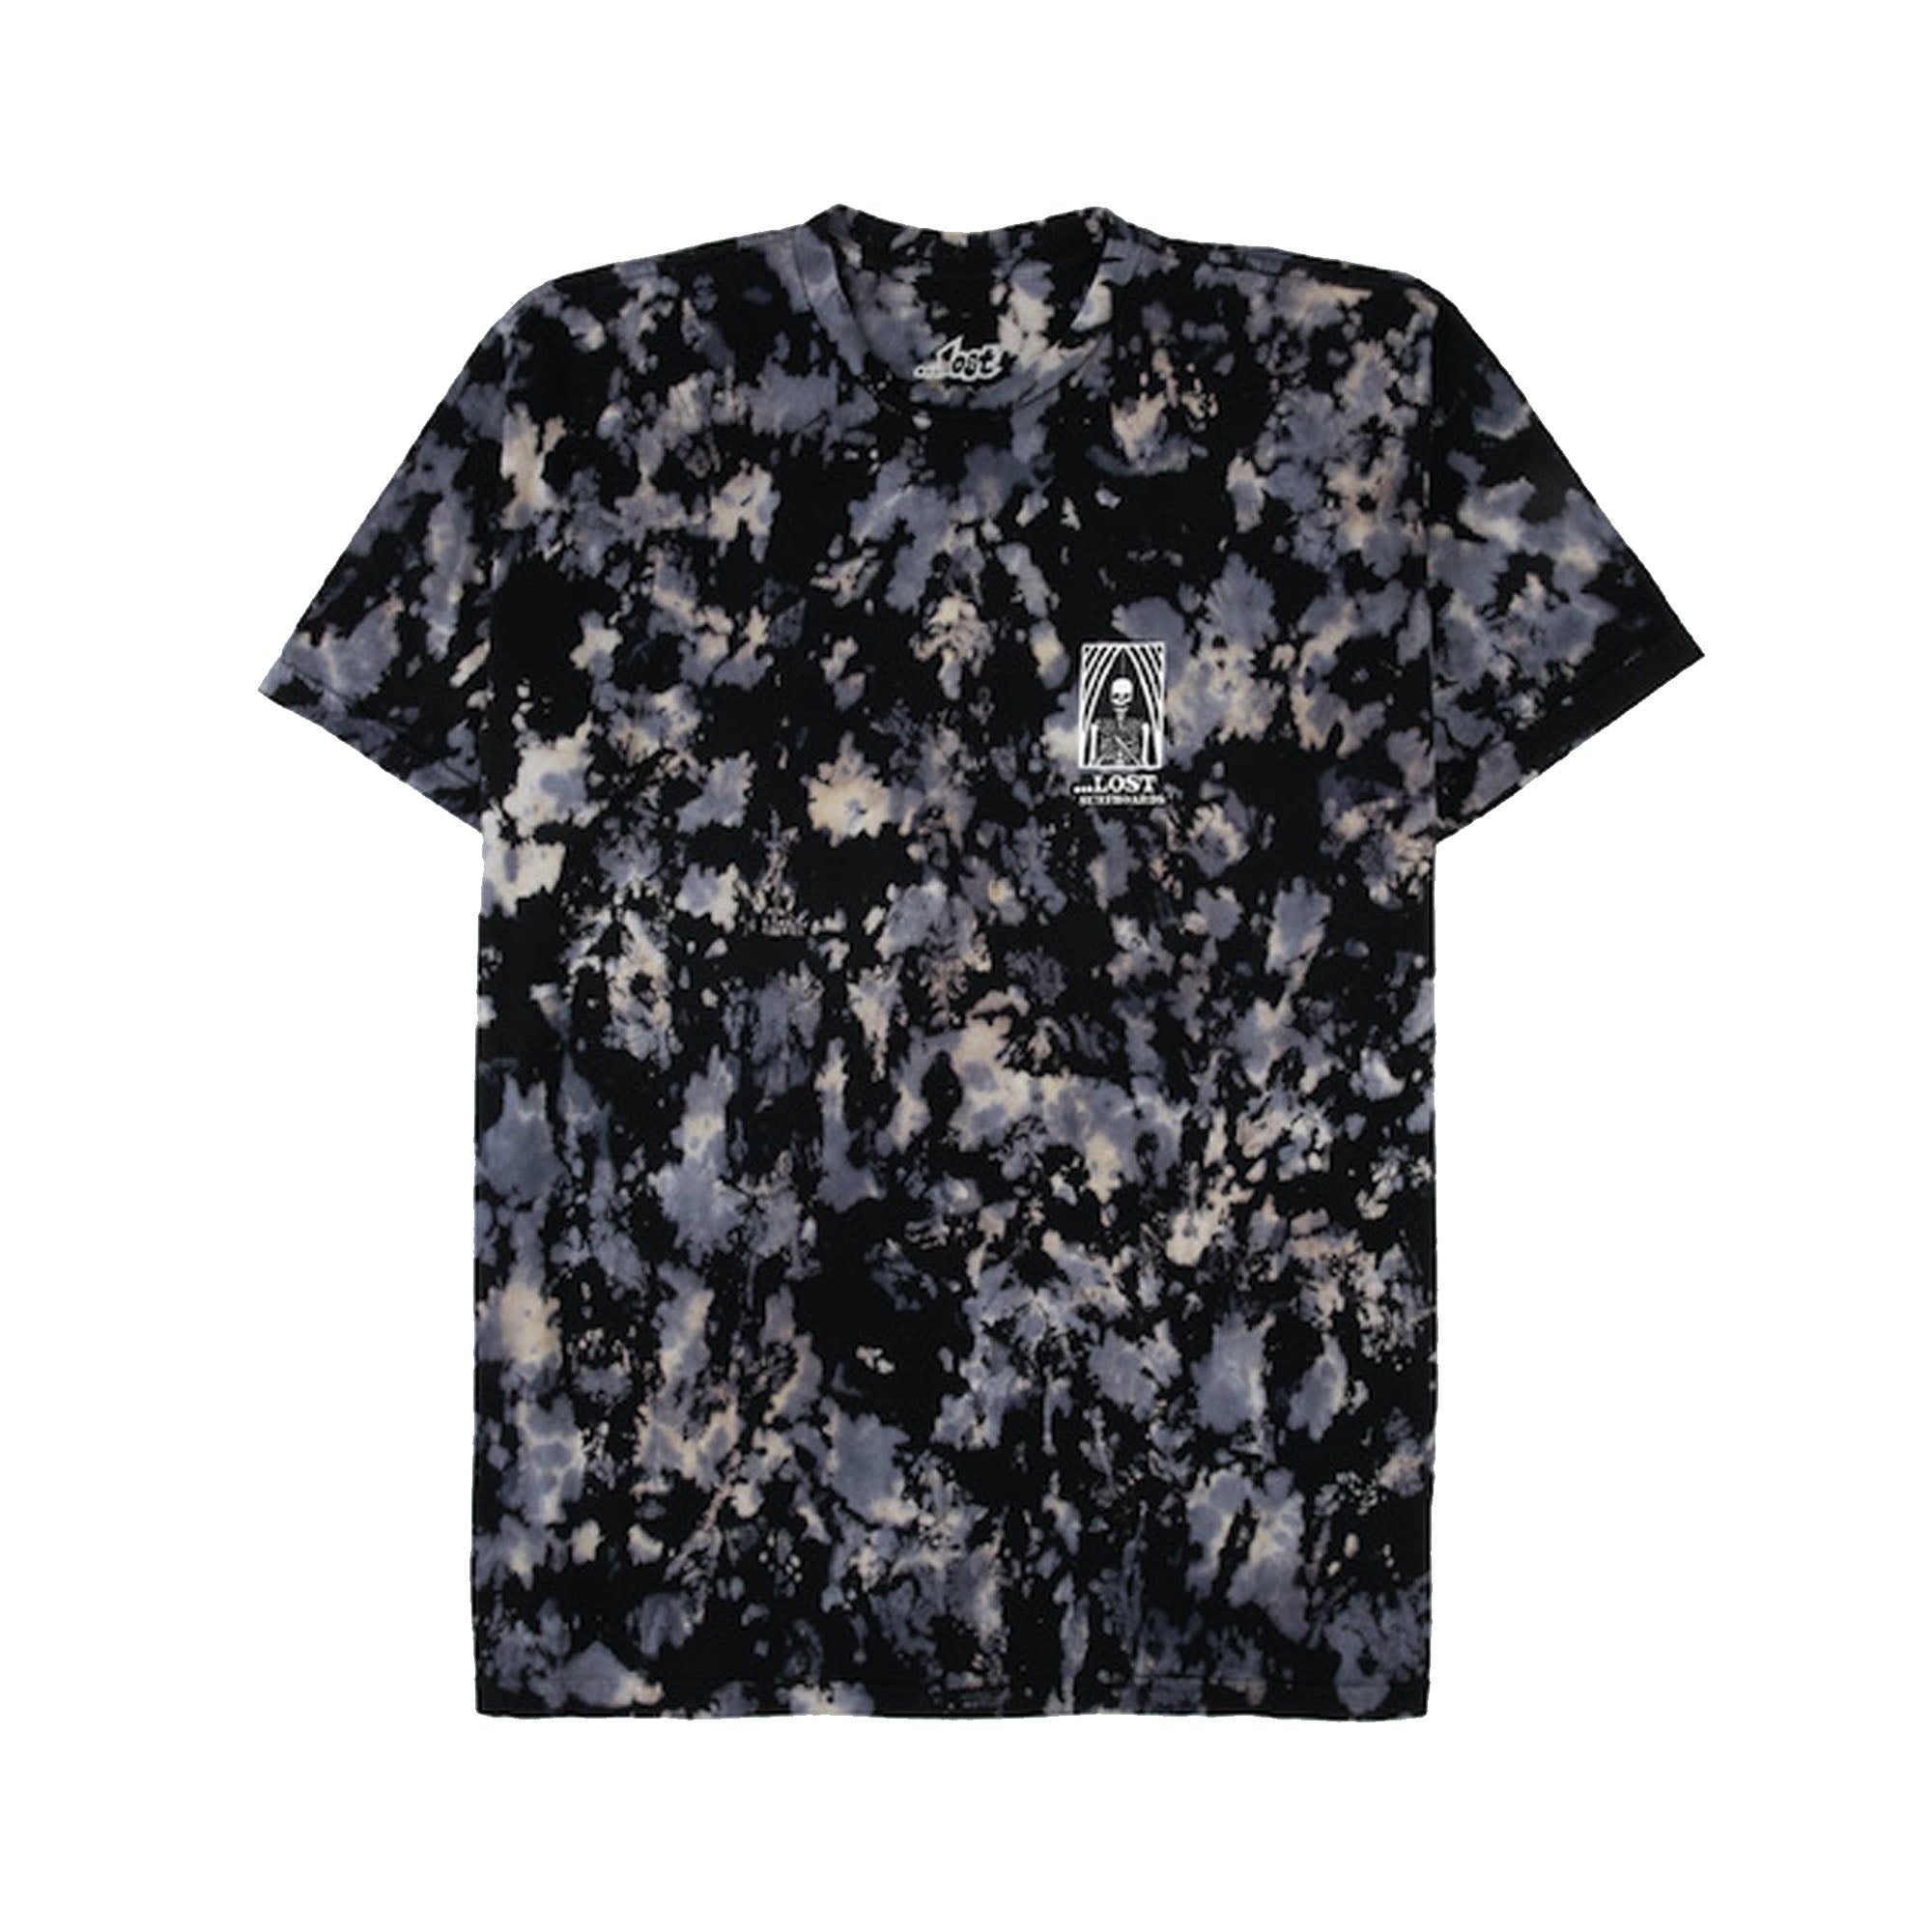 Lost Clasher Wash Men's S/S T-Shirt